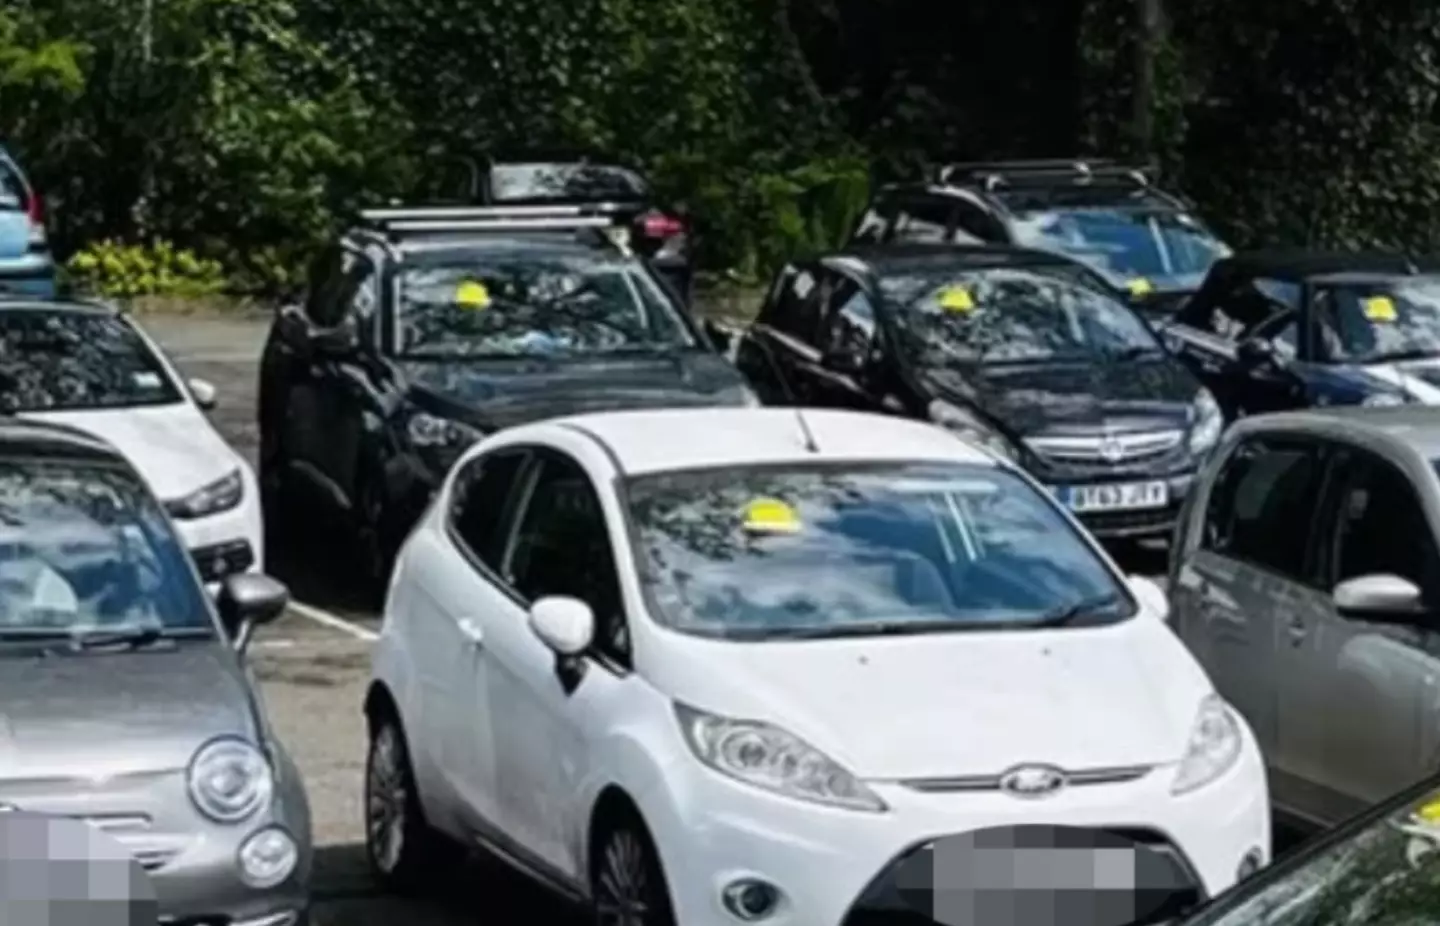 People took to social media to speculate on why every car had been ticketed.